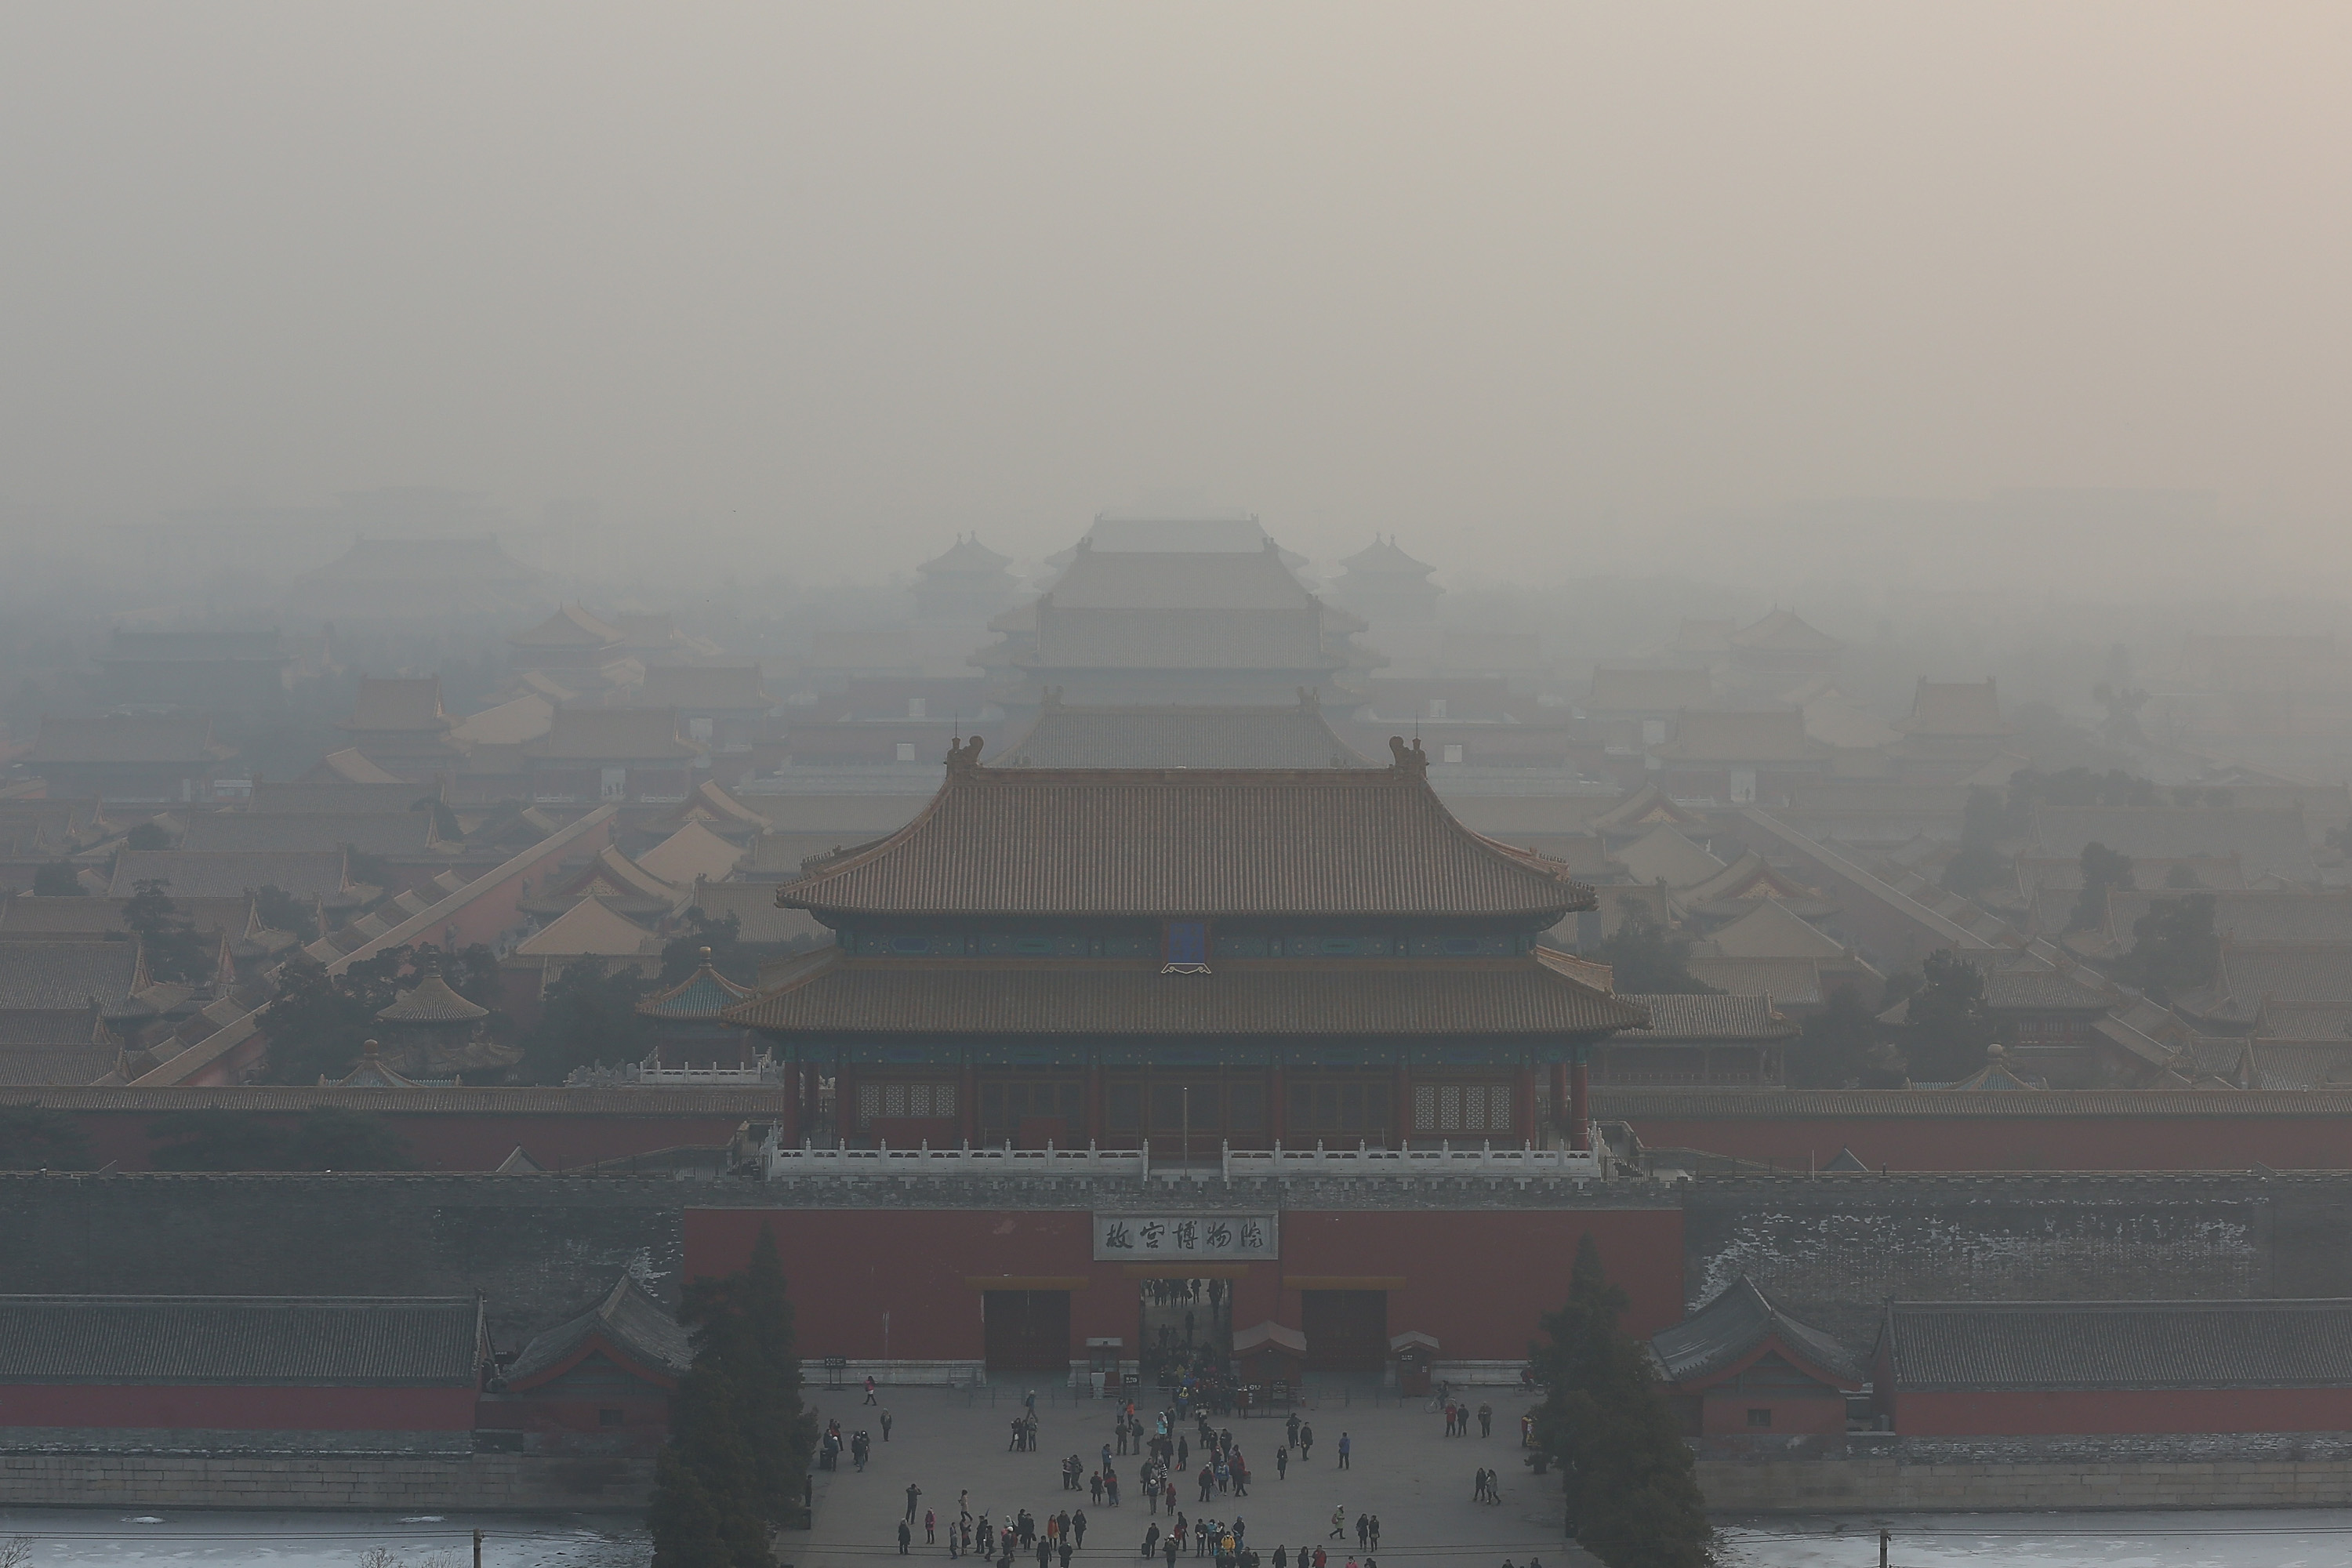 A popular and often repeated myth is that the people in Beijing, 

China can no longer see the Sun through all the pollution and smog in 

their city. In reality, the photos showing the "polluted city" were 

taken during a foggy weather and although there is a lot of pollution 

in Beijing, they can certainly see the Sun through the smog.